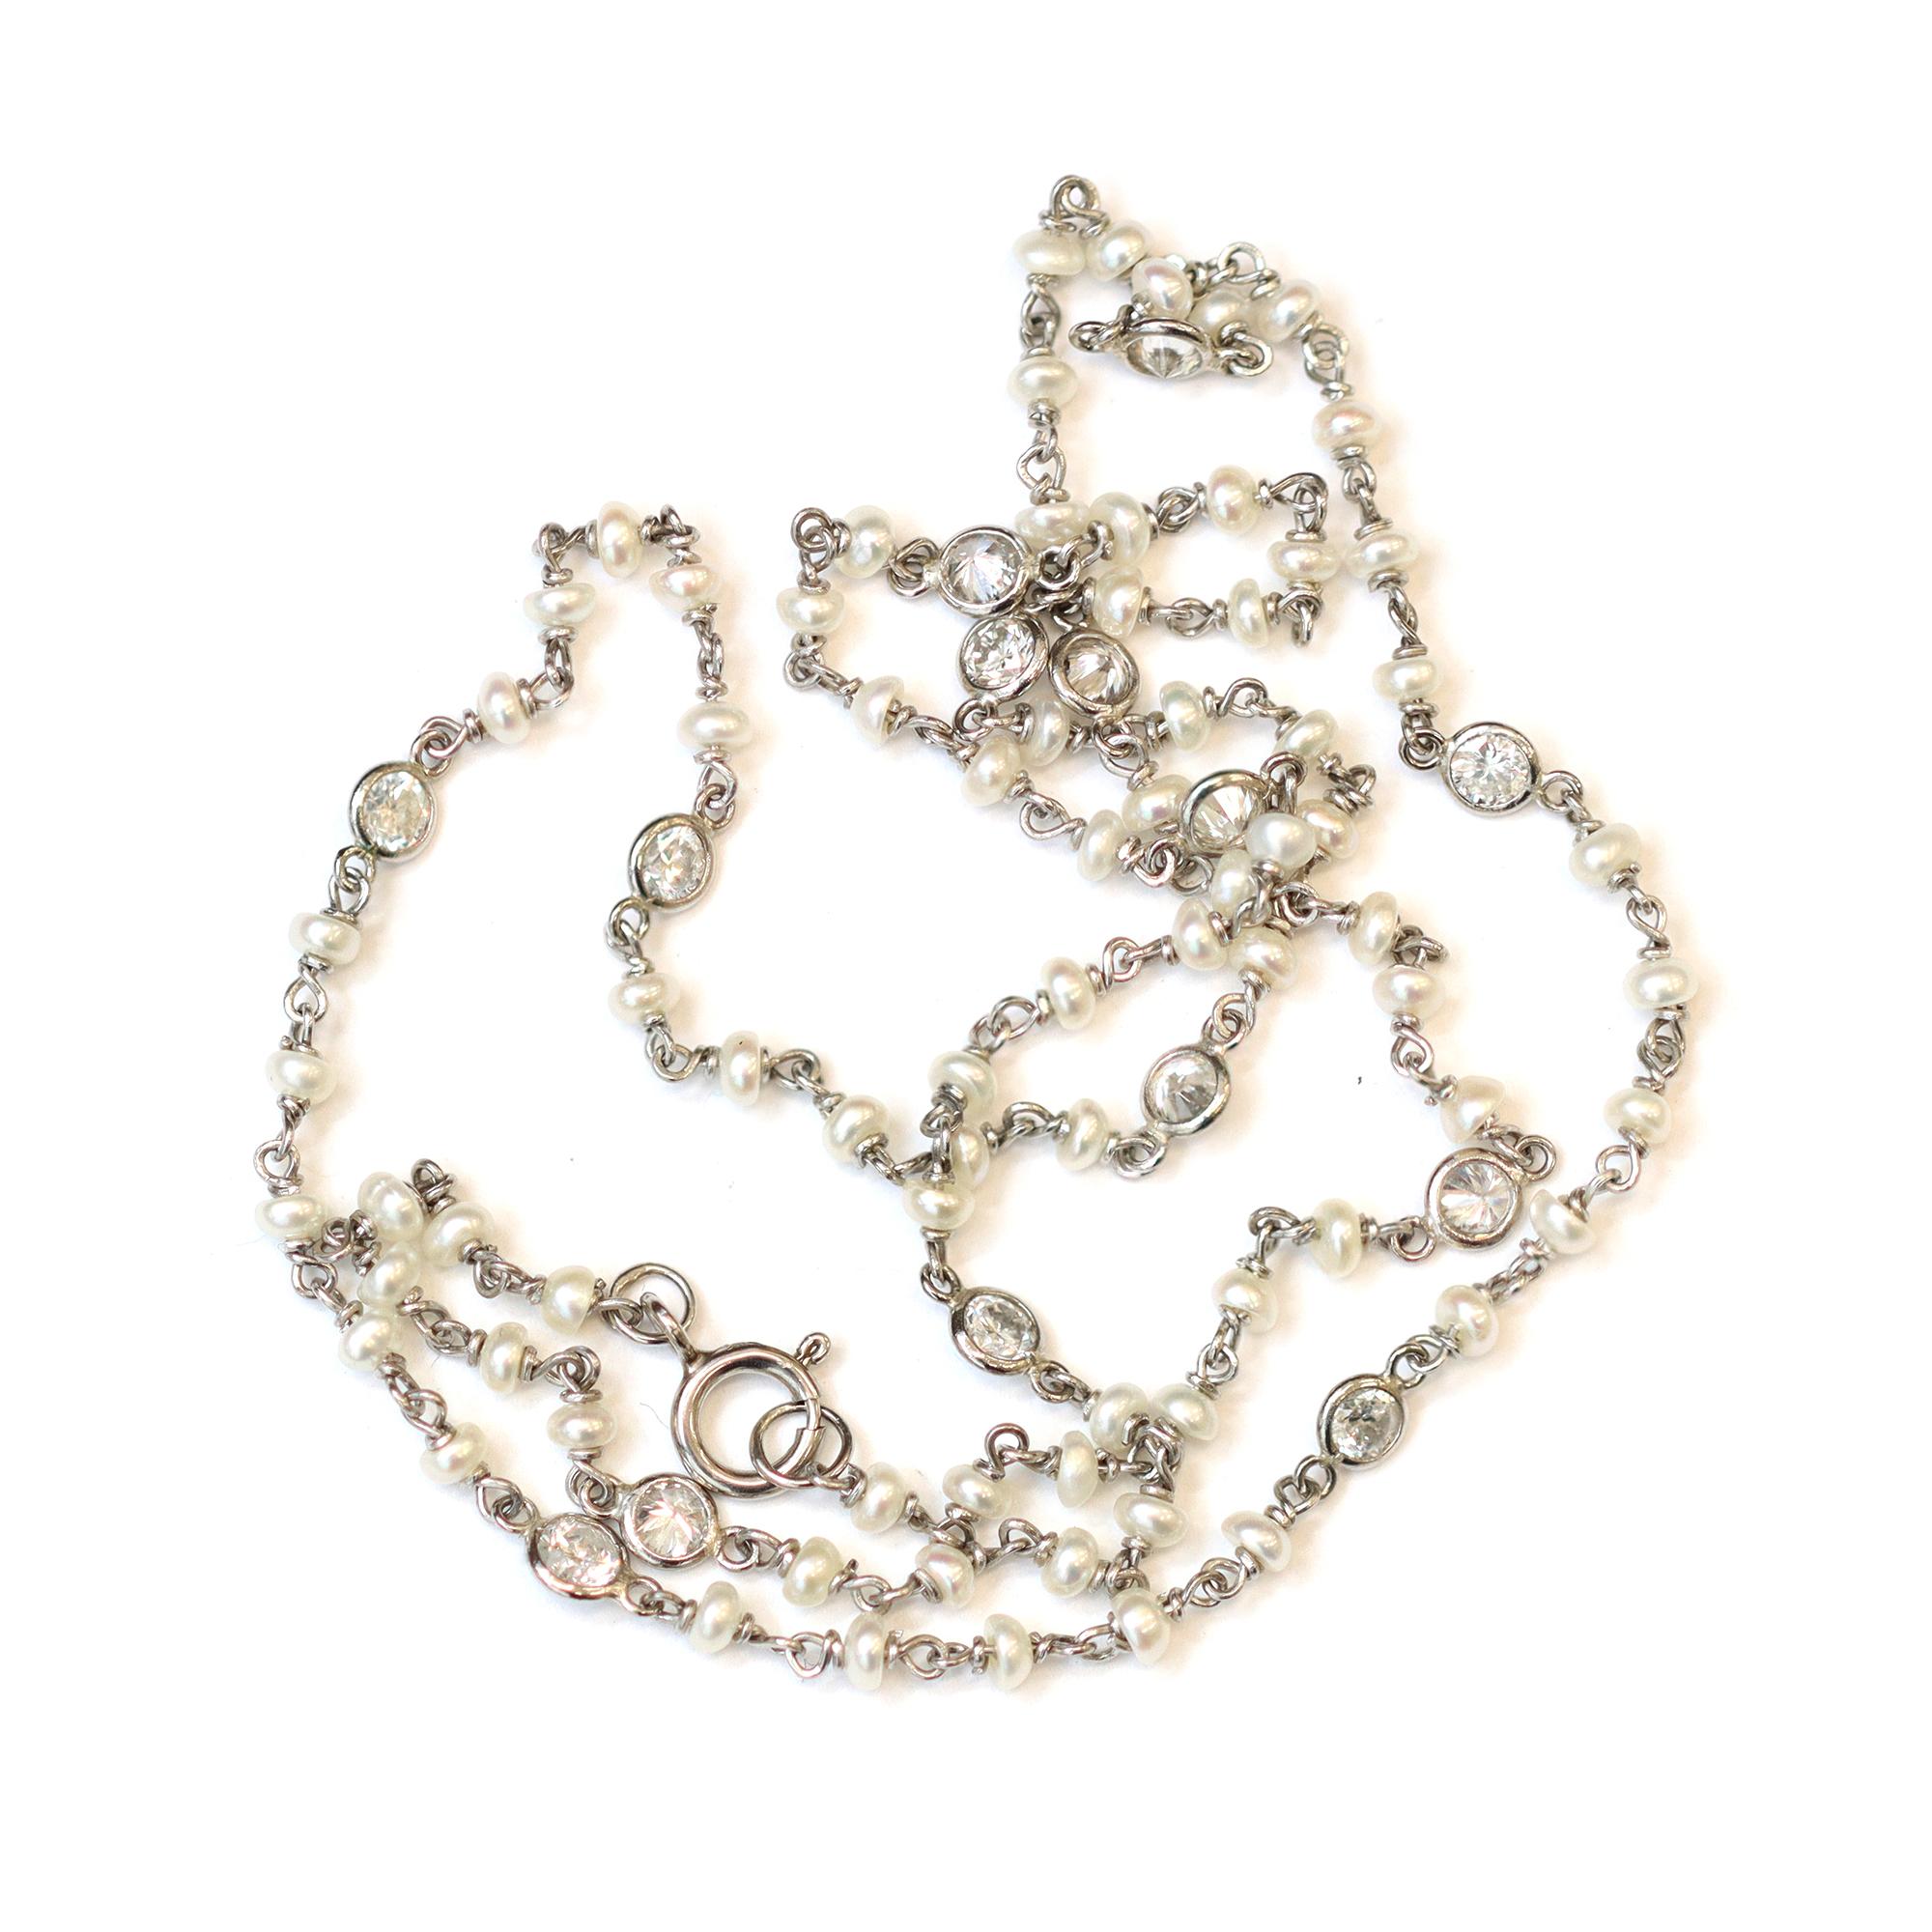 Modern Rosaria Varra Seed Pearl and Diamond Necklace set in Platinum